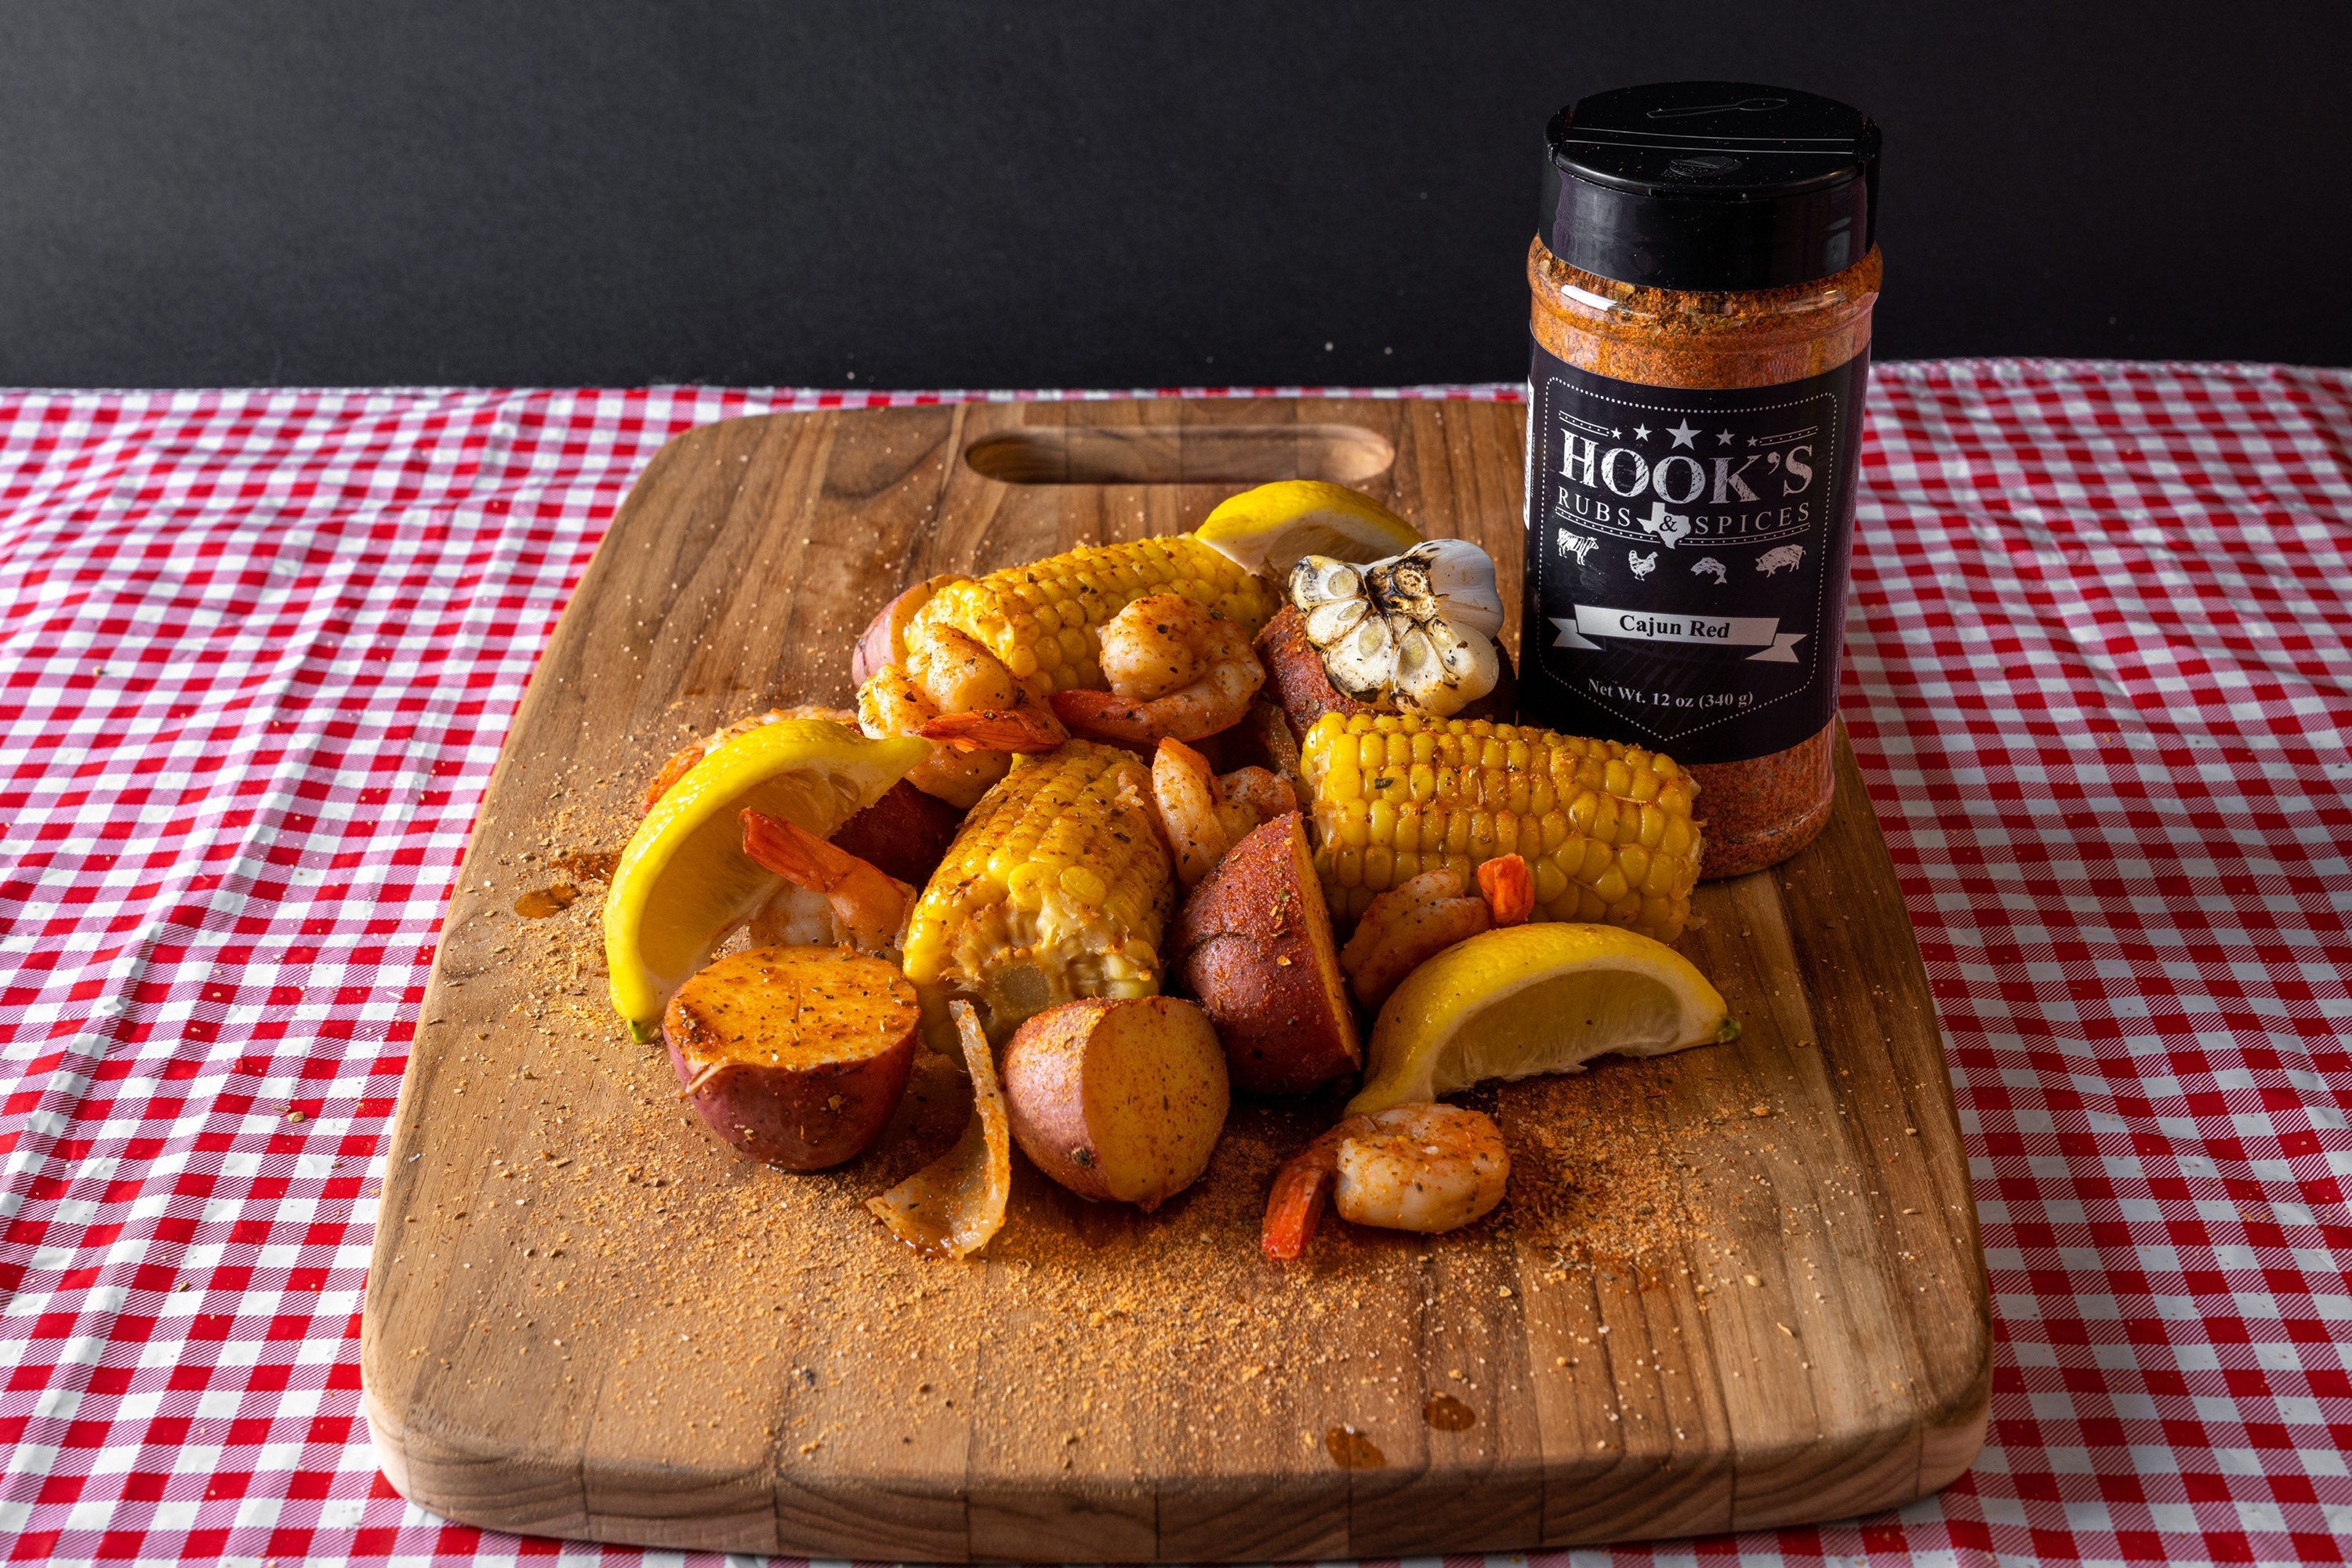 Guide's Choice Spice Rub, All Purpose Seasoning Blend - Spicy Hot & Honey  Sweet, Low Salt - For Grilling, Smoking and Searing Chicken, Fish, Pork,  Shrimp, Hamburgers, Potatoes, Veggies, Cocktails, EVERYTHING 